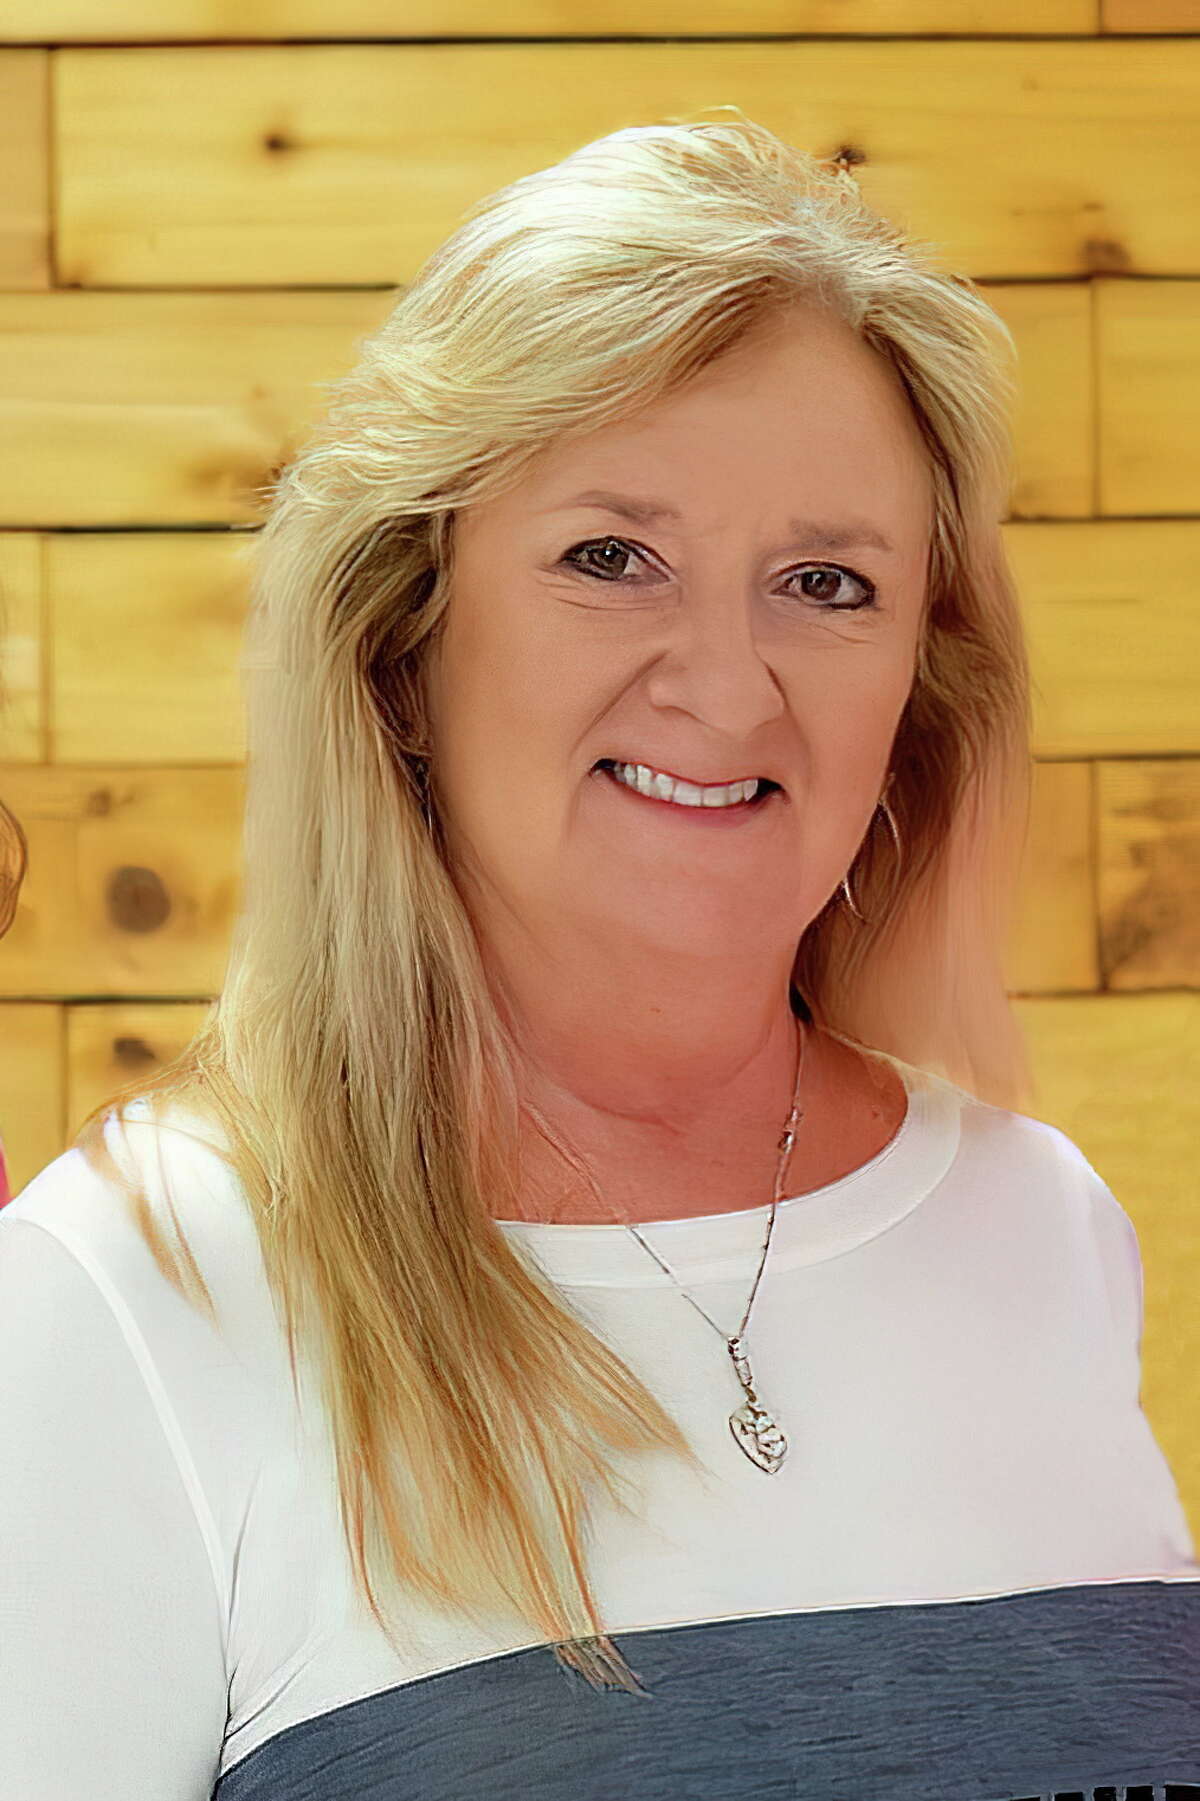 The Texas Association of Fair and Events’ 2023 “Professional of the Year” award went to Cindy Schmidt, fair manager of Fort Bend County Fair Association.